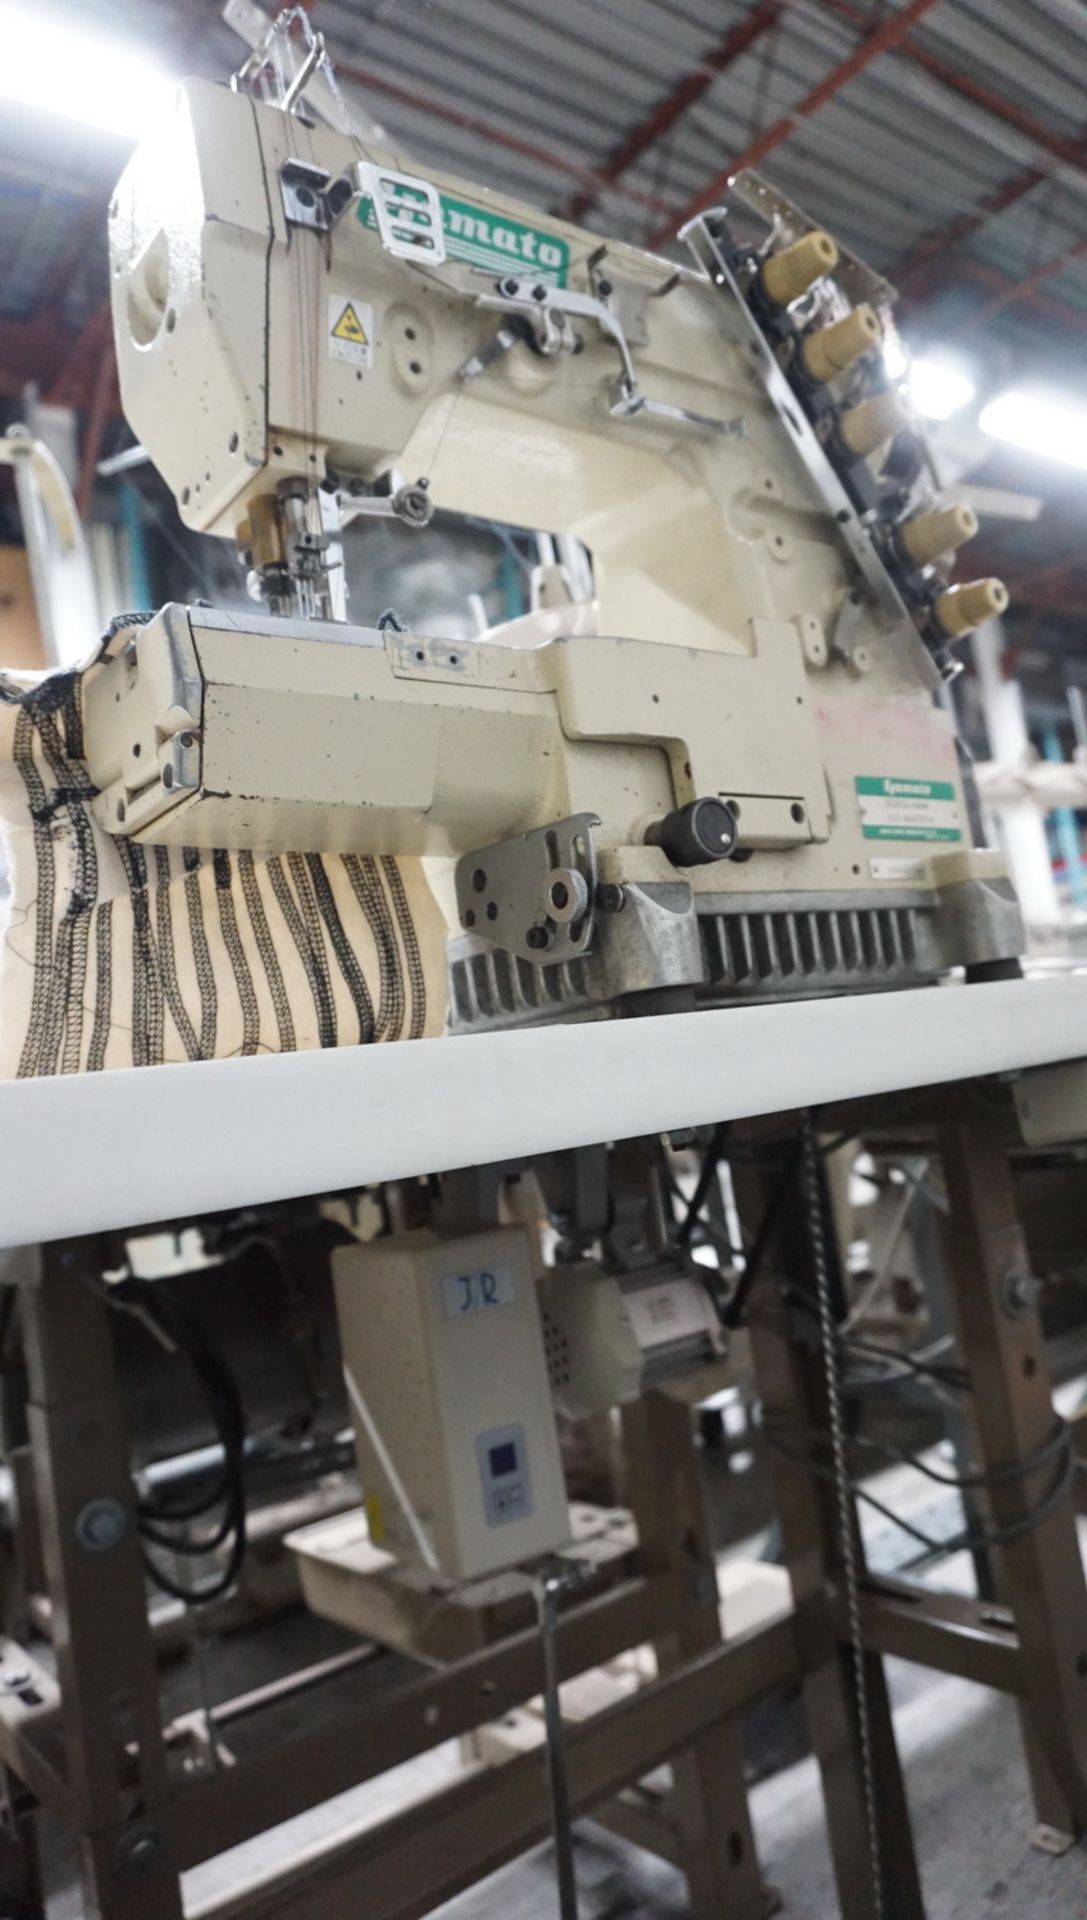 YAMATO VC2713-164M/UT-A32/ST-A 3-NEEDLE CYLINDER COVERSTITCH MACHINE, S/N N84522 (LOCATED @ 101 - Image 5 of 6